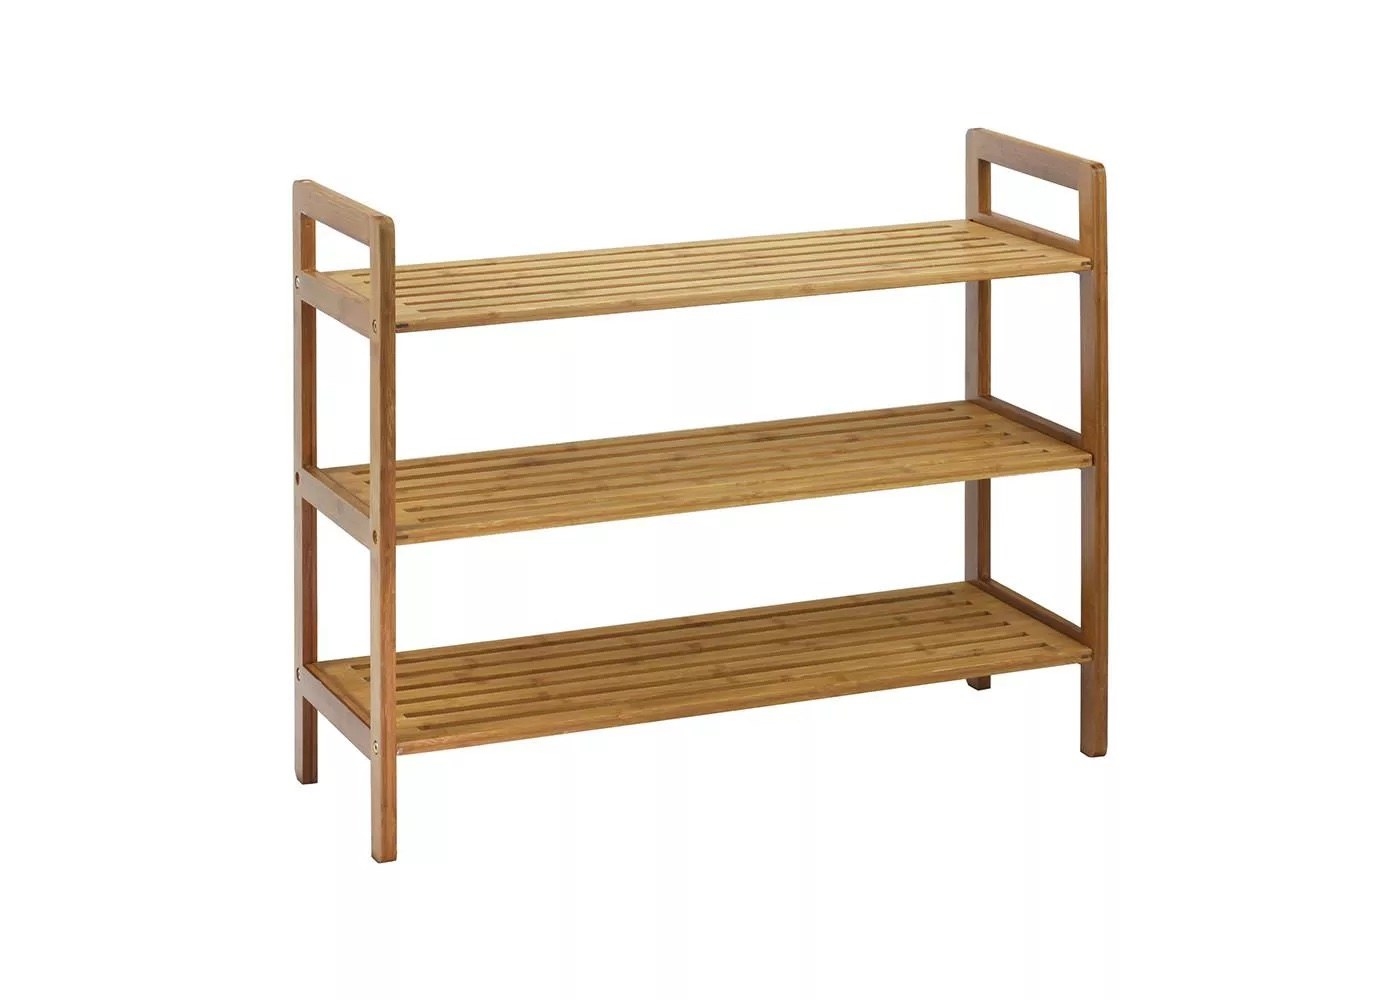 A three-tiered bamboo shoe rack.